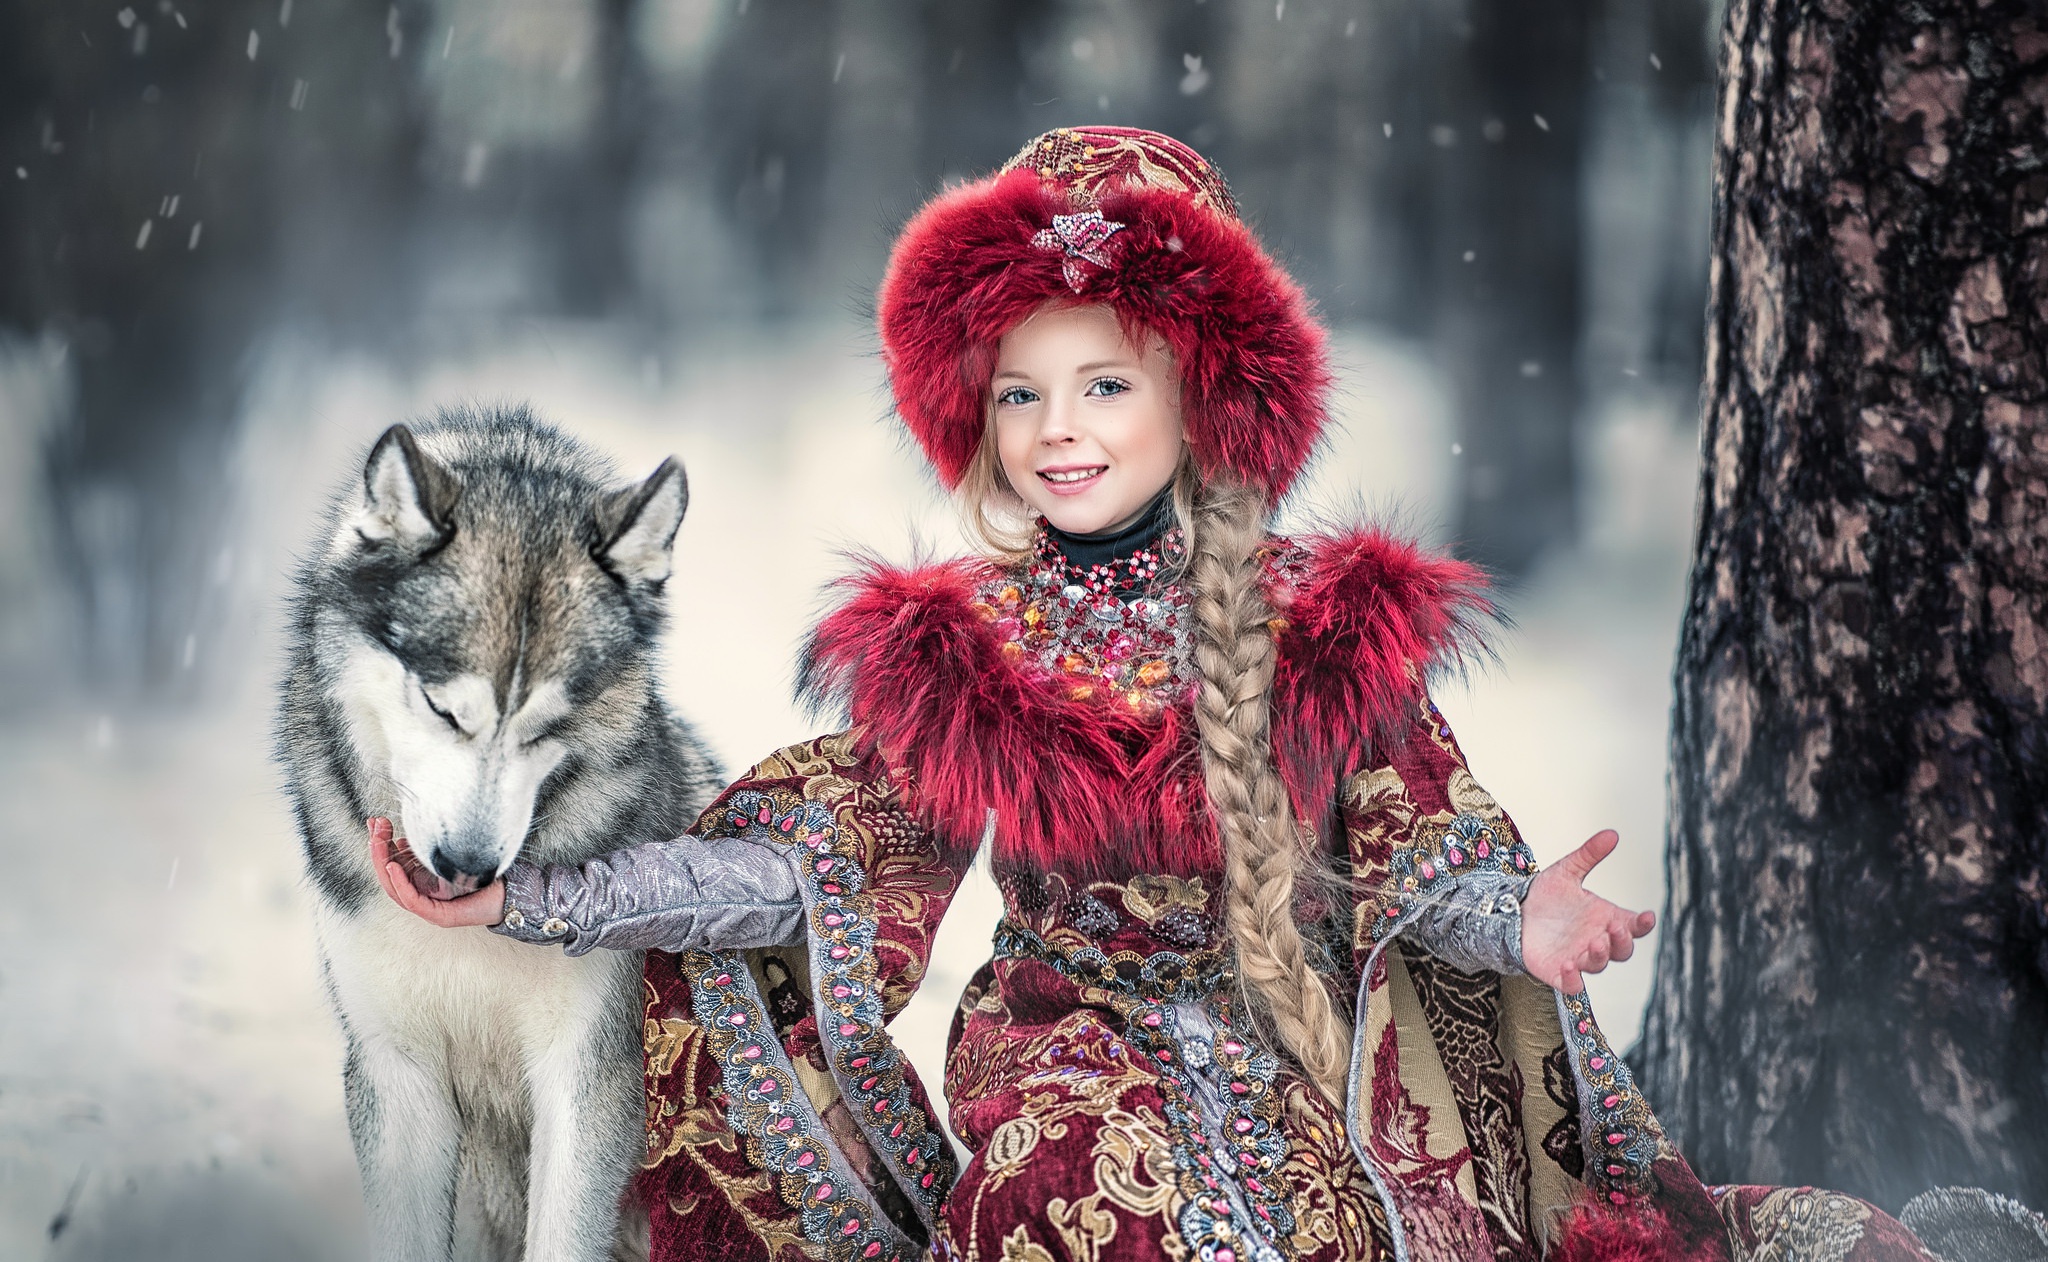 photography, child, braid, depth of field, hat, smile, traditional costume, wolfdog